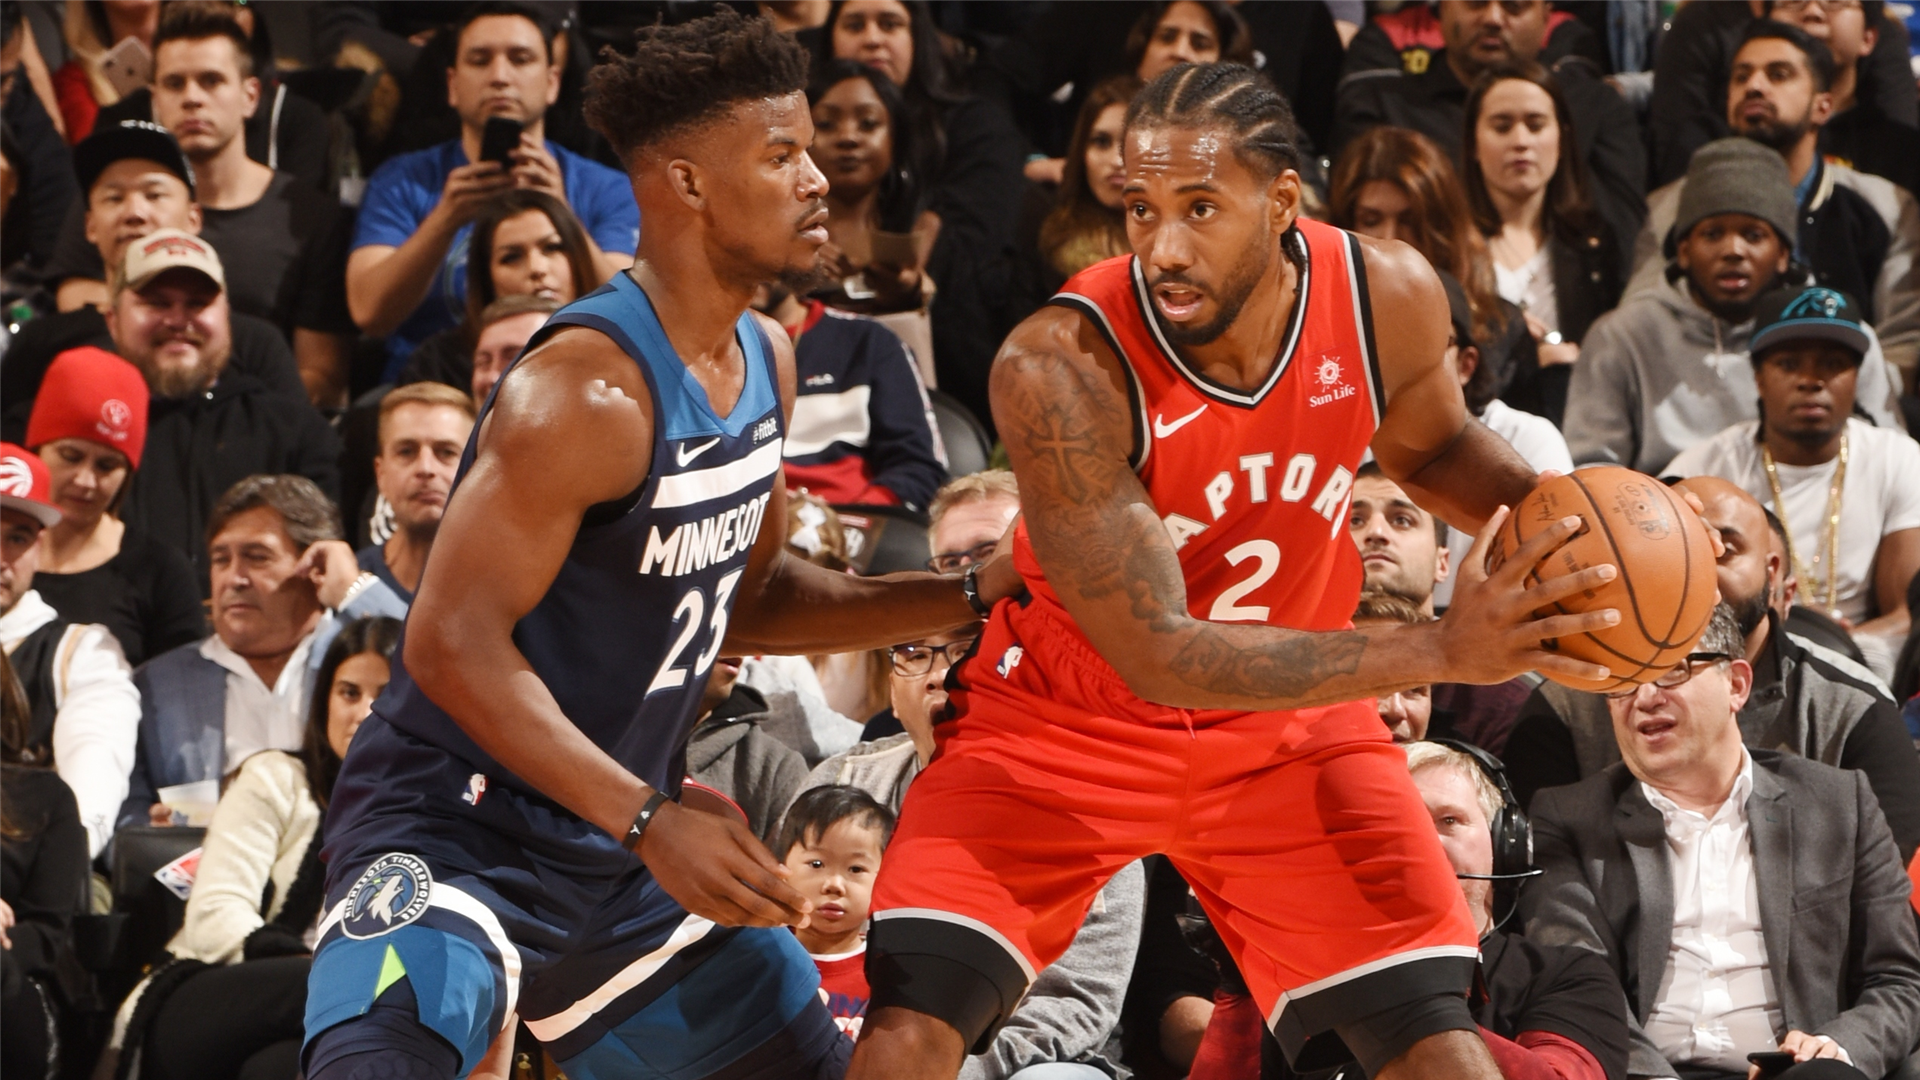 Four takeaways from the Toronto Raptors 112-105 win over the Minnesota Timberwolves ...1920 x 1080